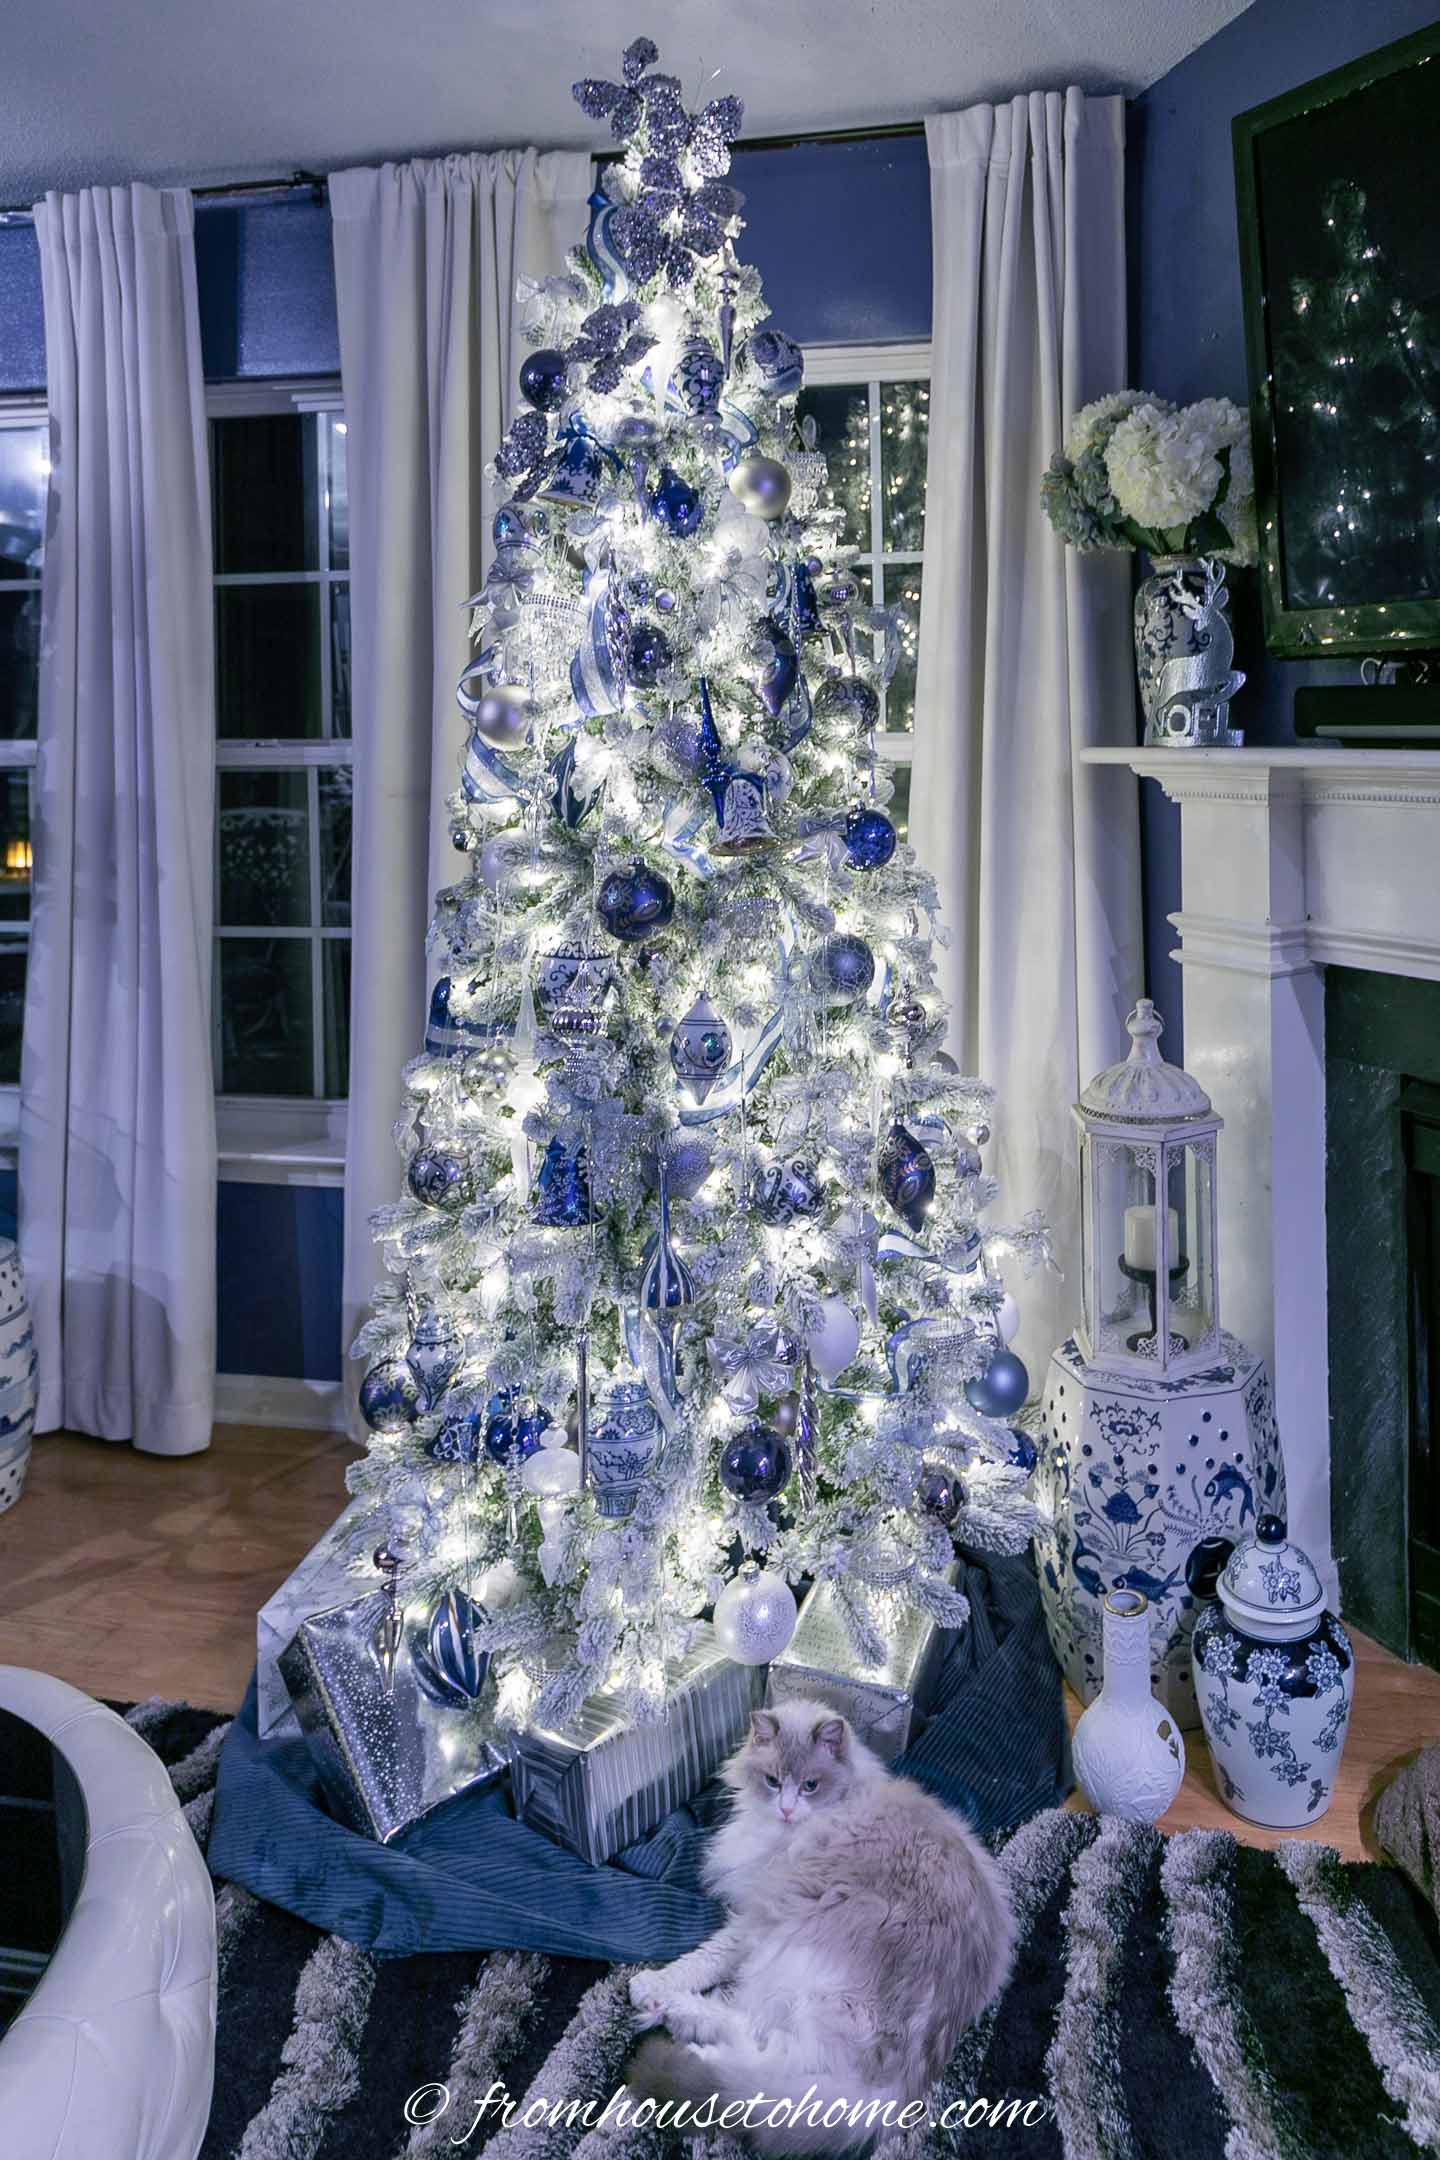 Wintry white, blue and silver christmas tree with the lights on at night